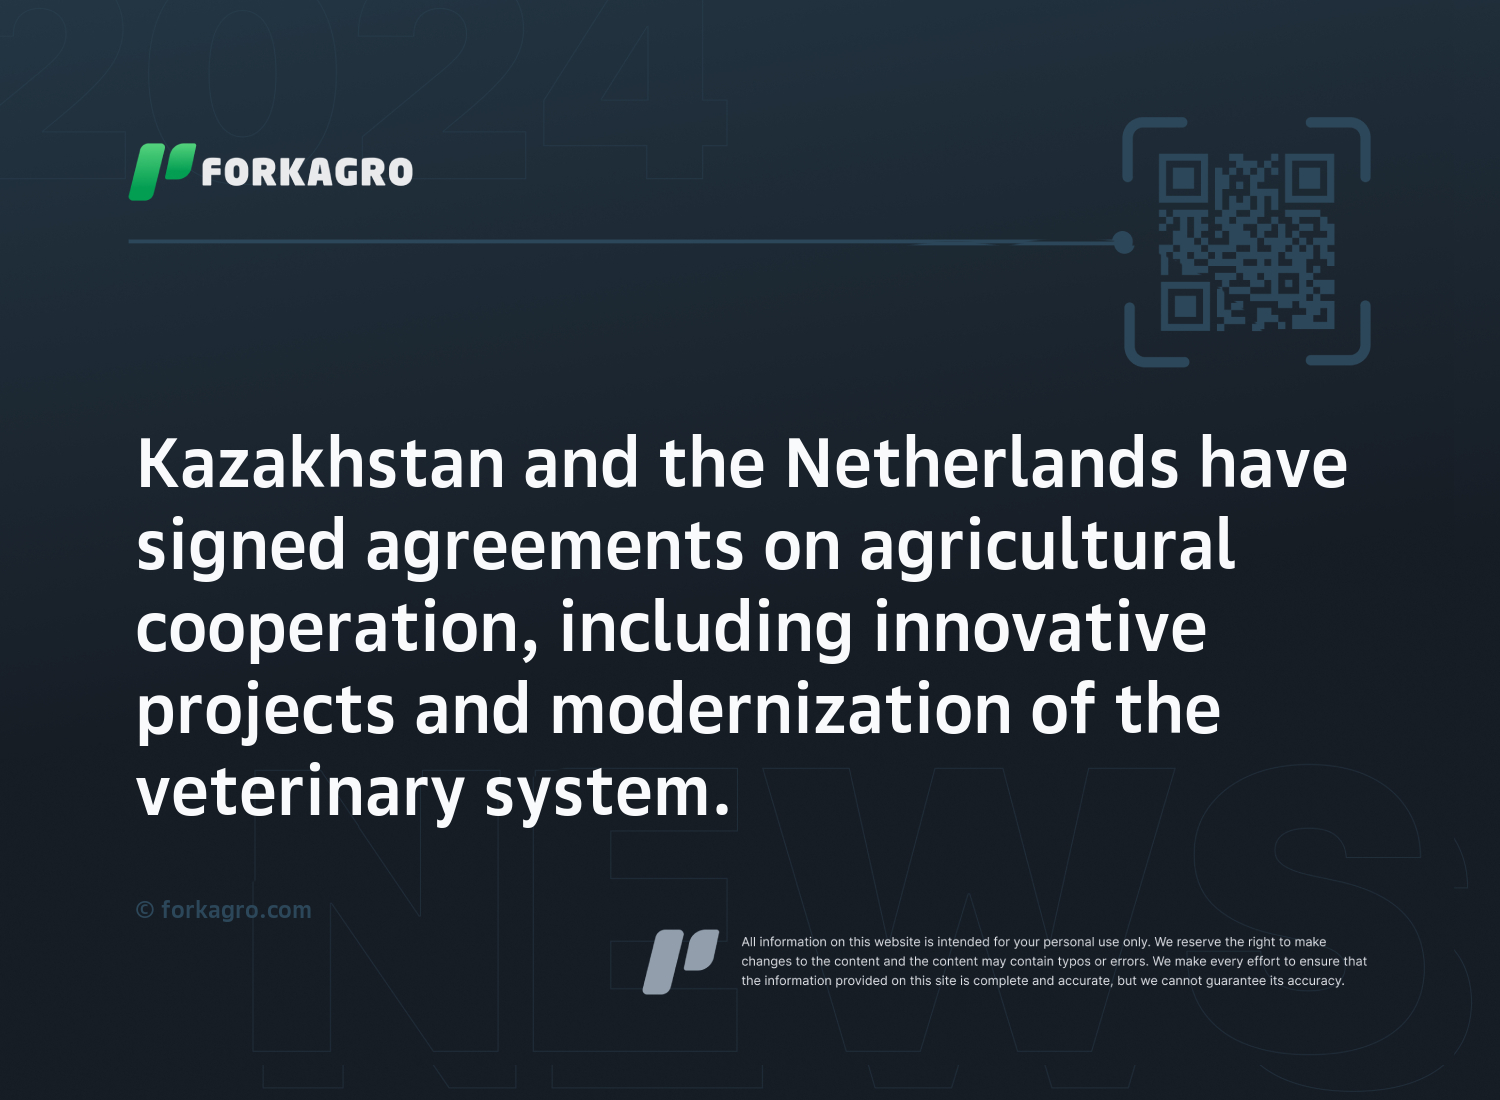 Kazakhstan and the Netherlands have signed agreements on agricultural cooperation, including innovative projects and modernization of the veterinary system.